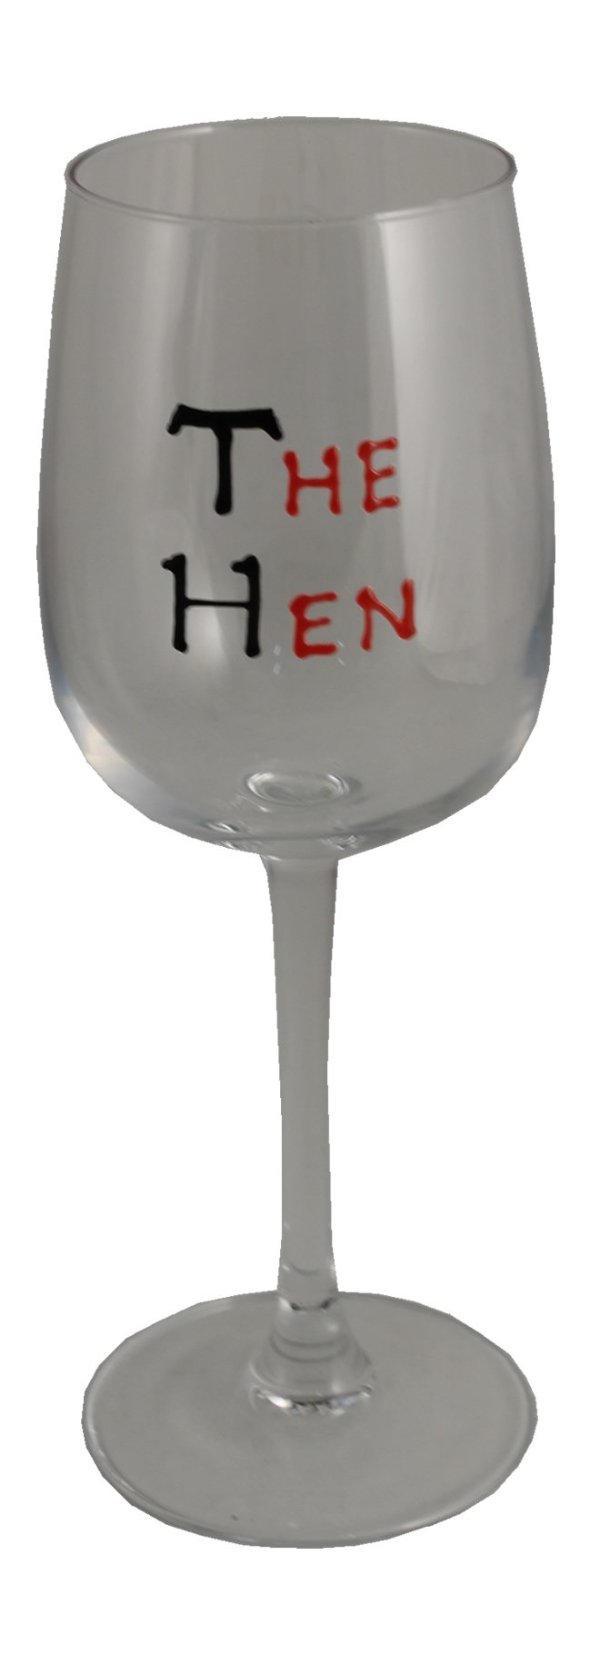 The Hen Wine Glass (Blk/Red)